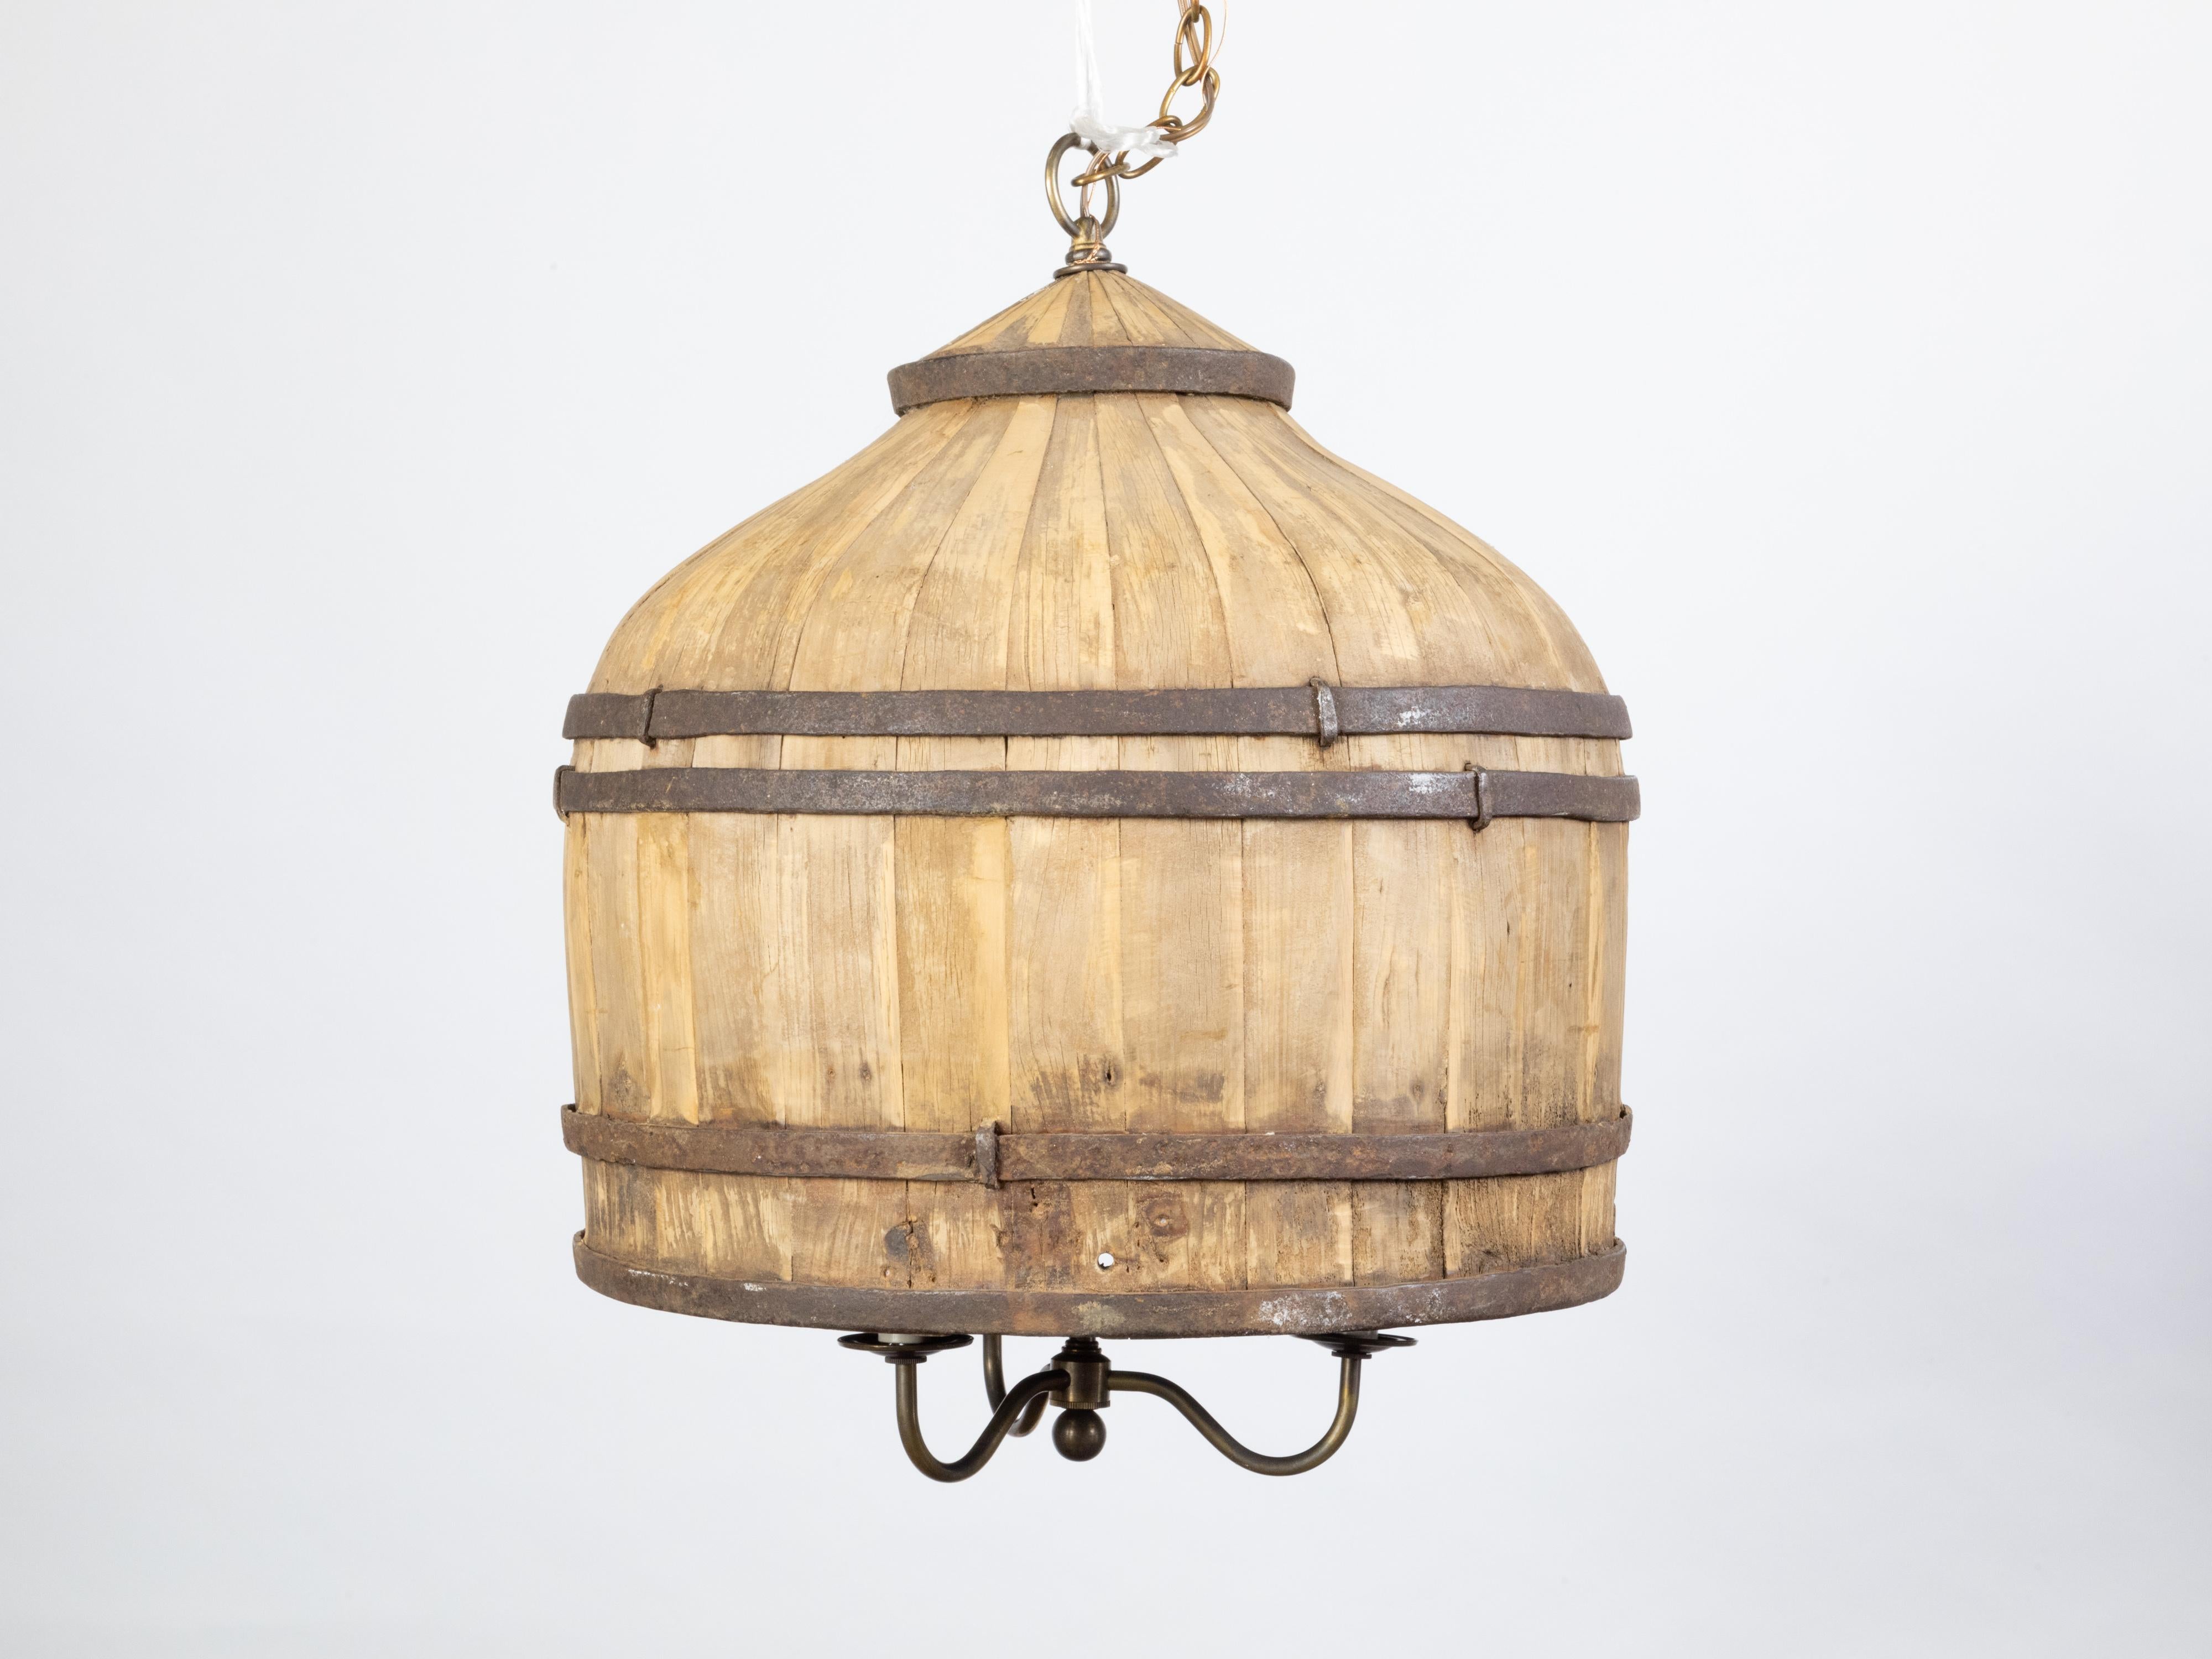 Metal Rustic English Vintage Wooden Barrel Light Fixture with Three Scrolling Arms For Sale